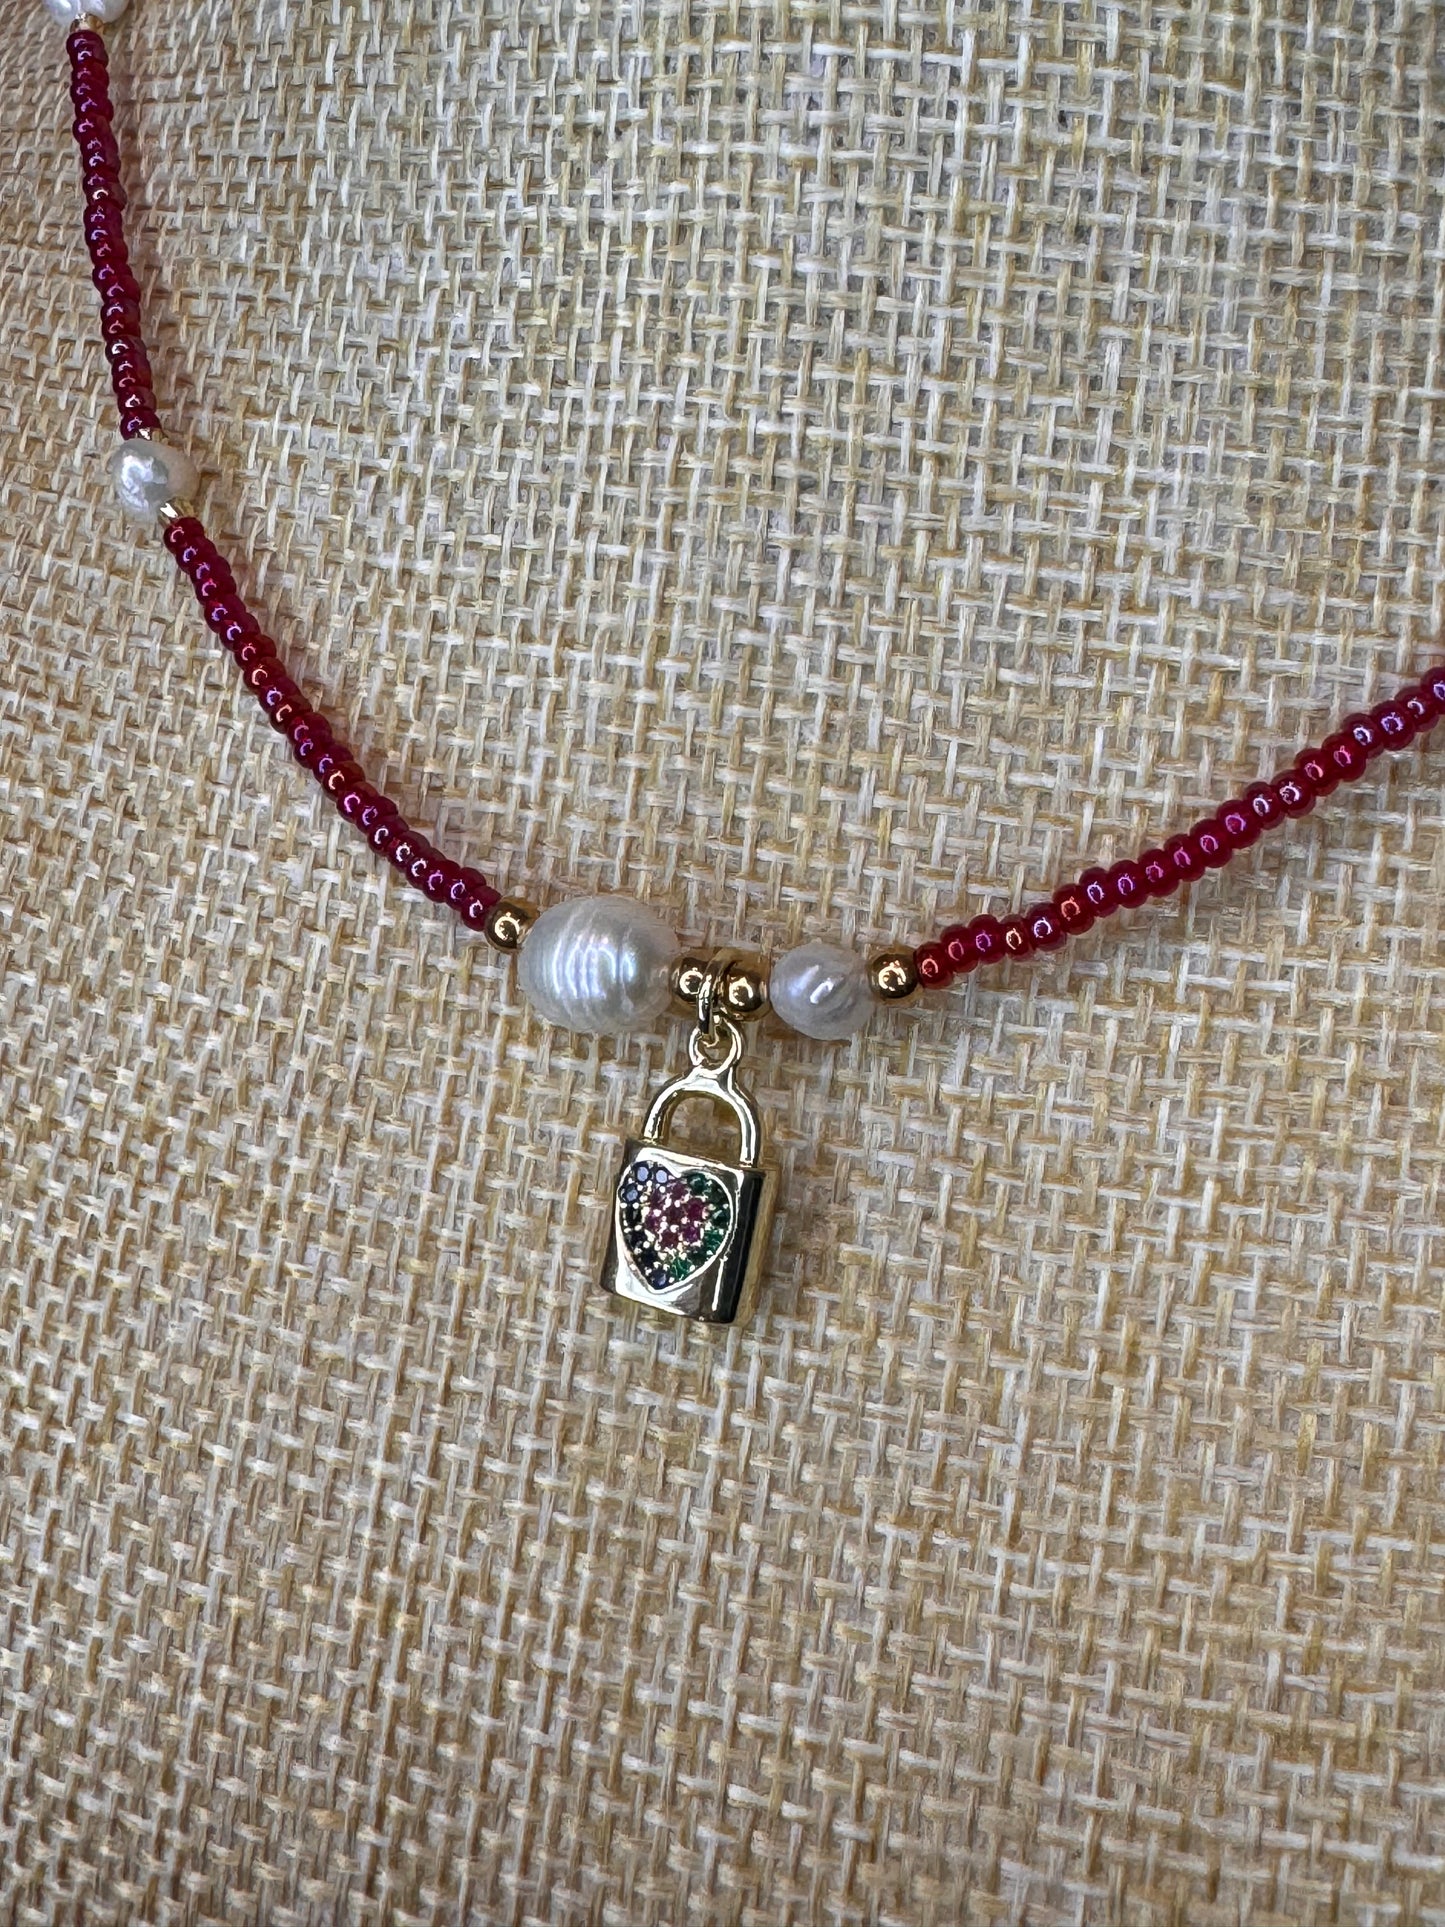 Bead necklace, chocker style, unicolour chocker, freshwater necklace, charm with crystals, handmade, locked heart charm